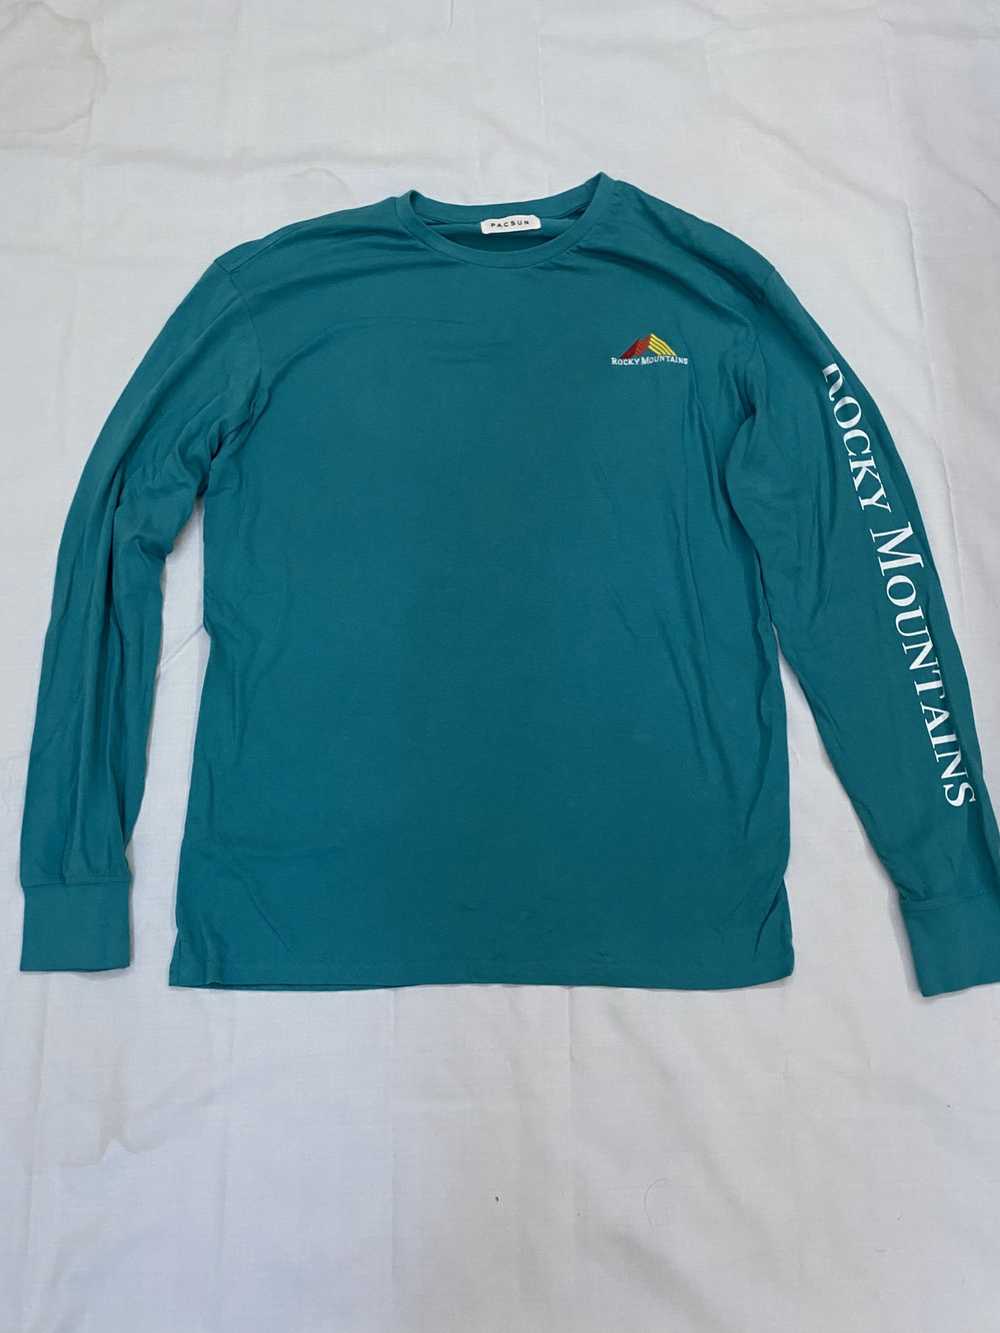 Pacsun Rocky Mountains Long Sleeve T-Shirt - image 1